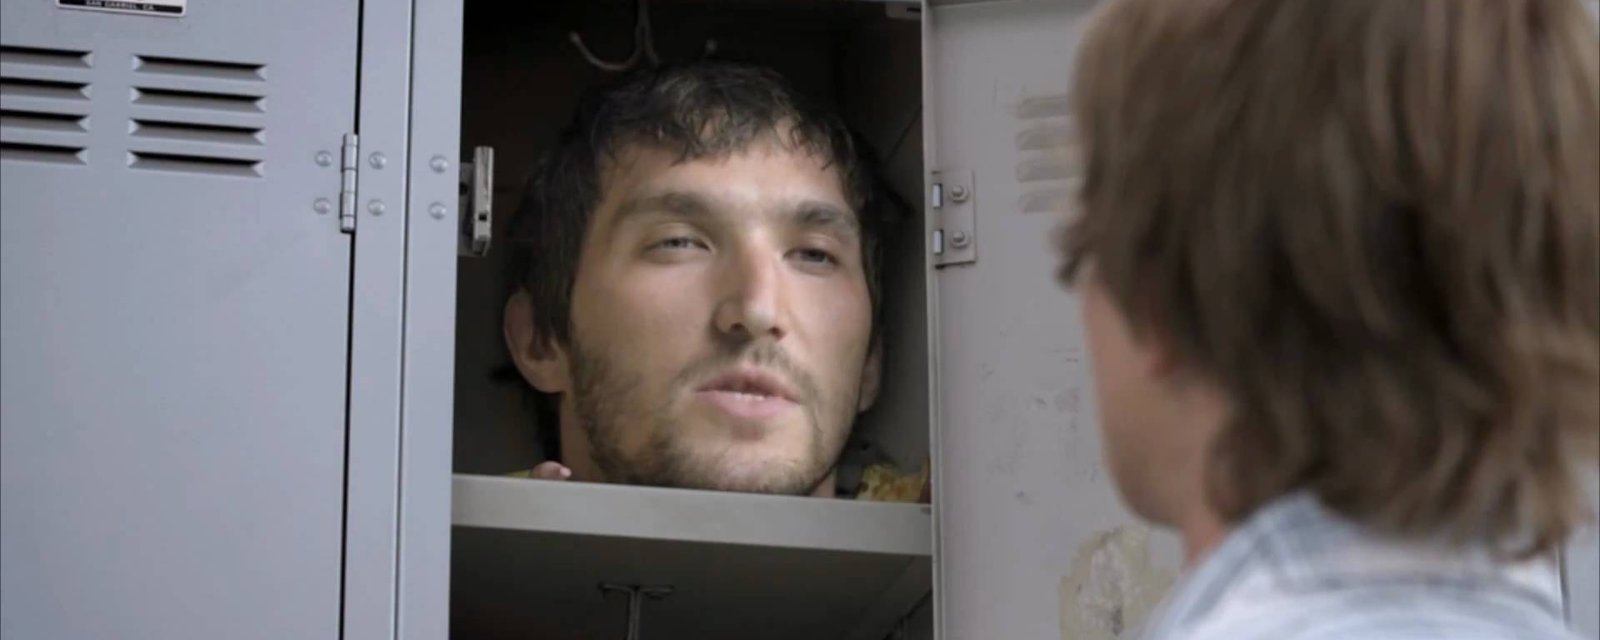 Hilarious commercials featuring Ovechkin